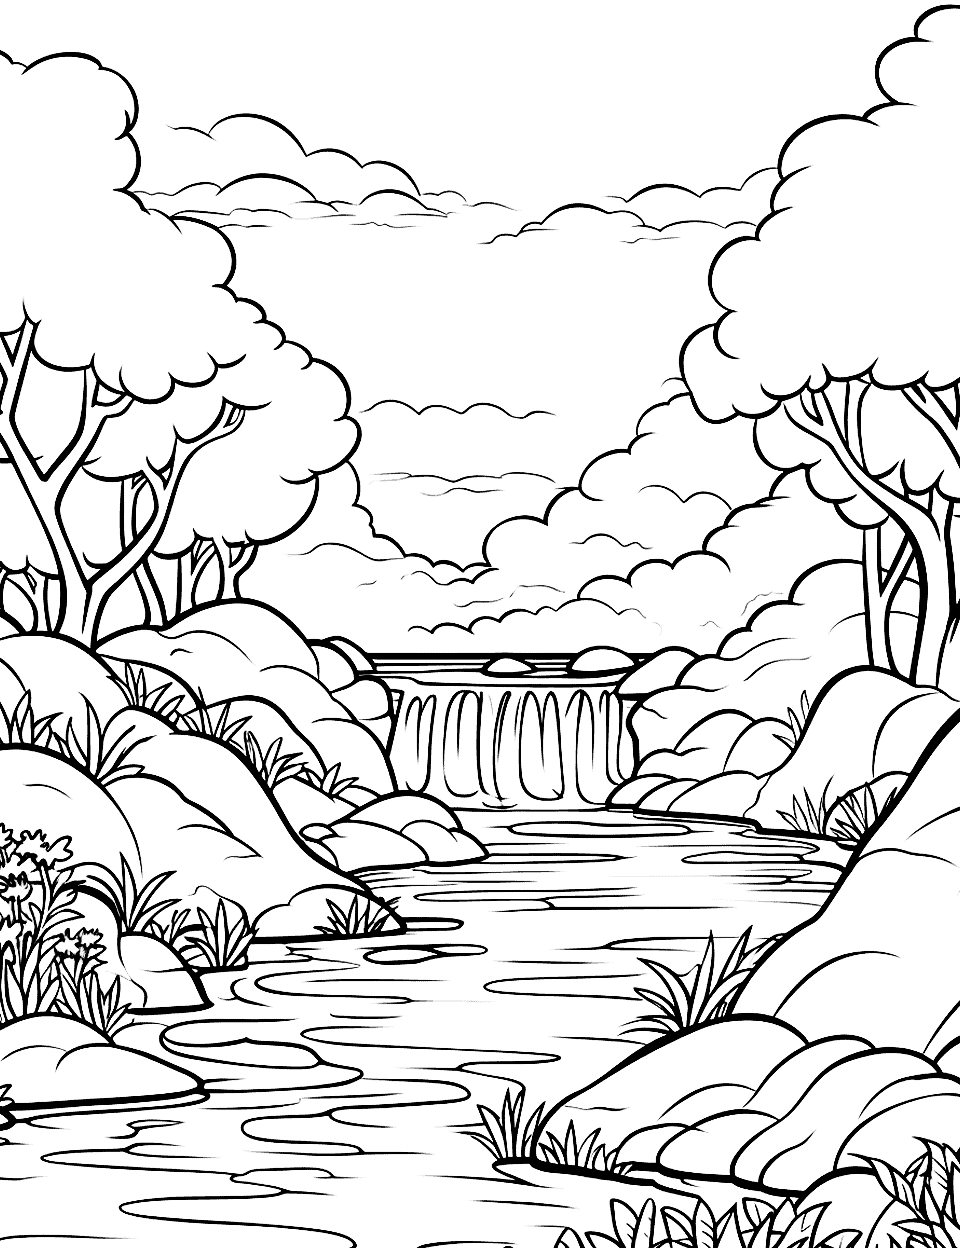 Tranquil Waterfall Oasis Coloring Page - A cascading waterfall into a clear, serene pool surrounded by rocks.